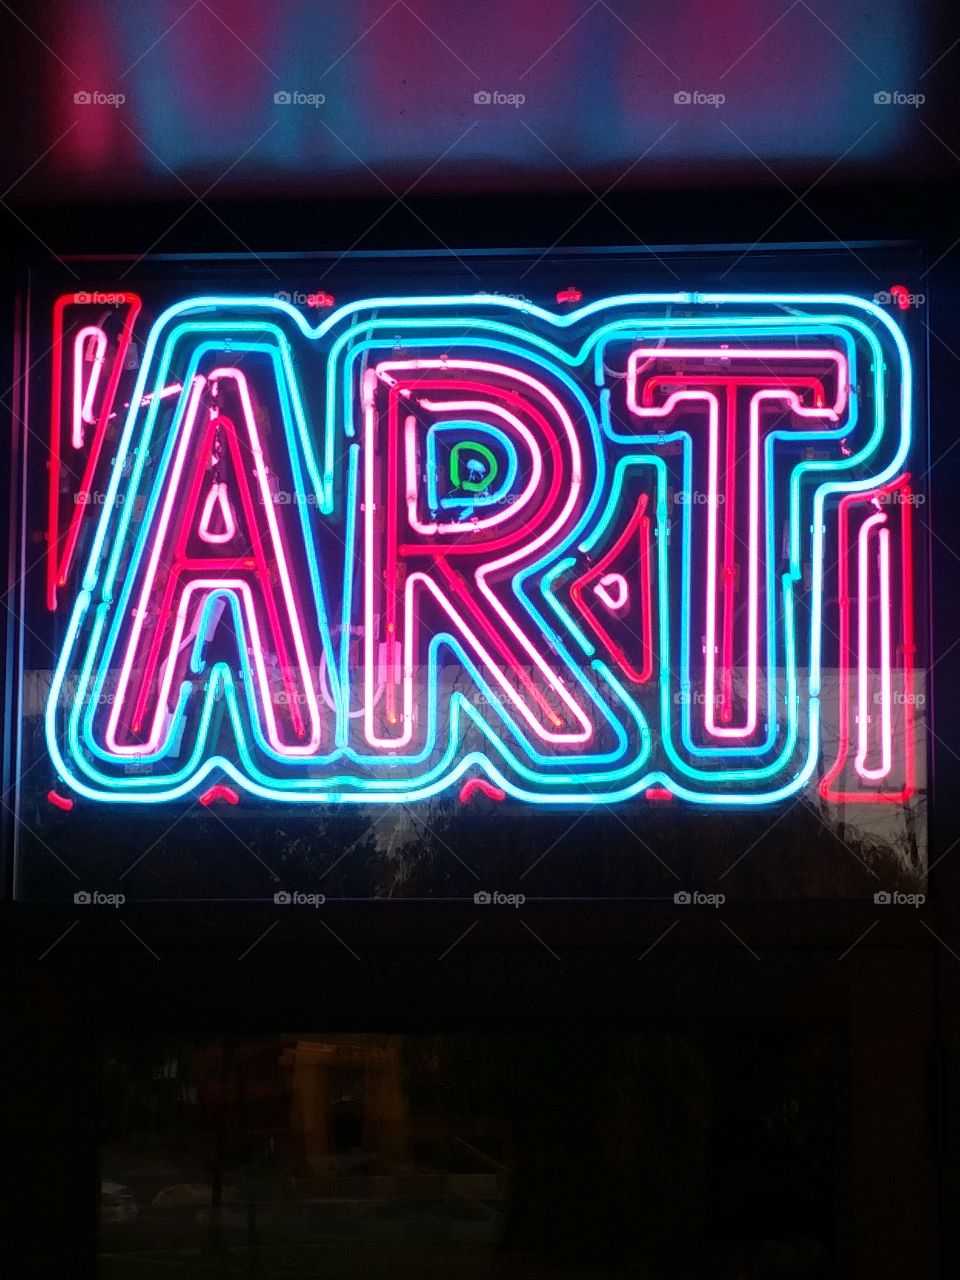 neon sign that says "art"